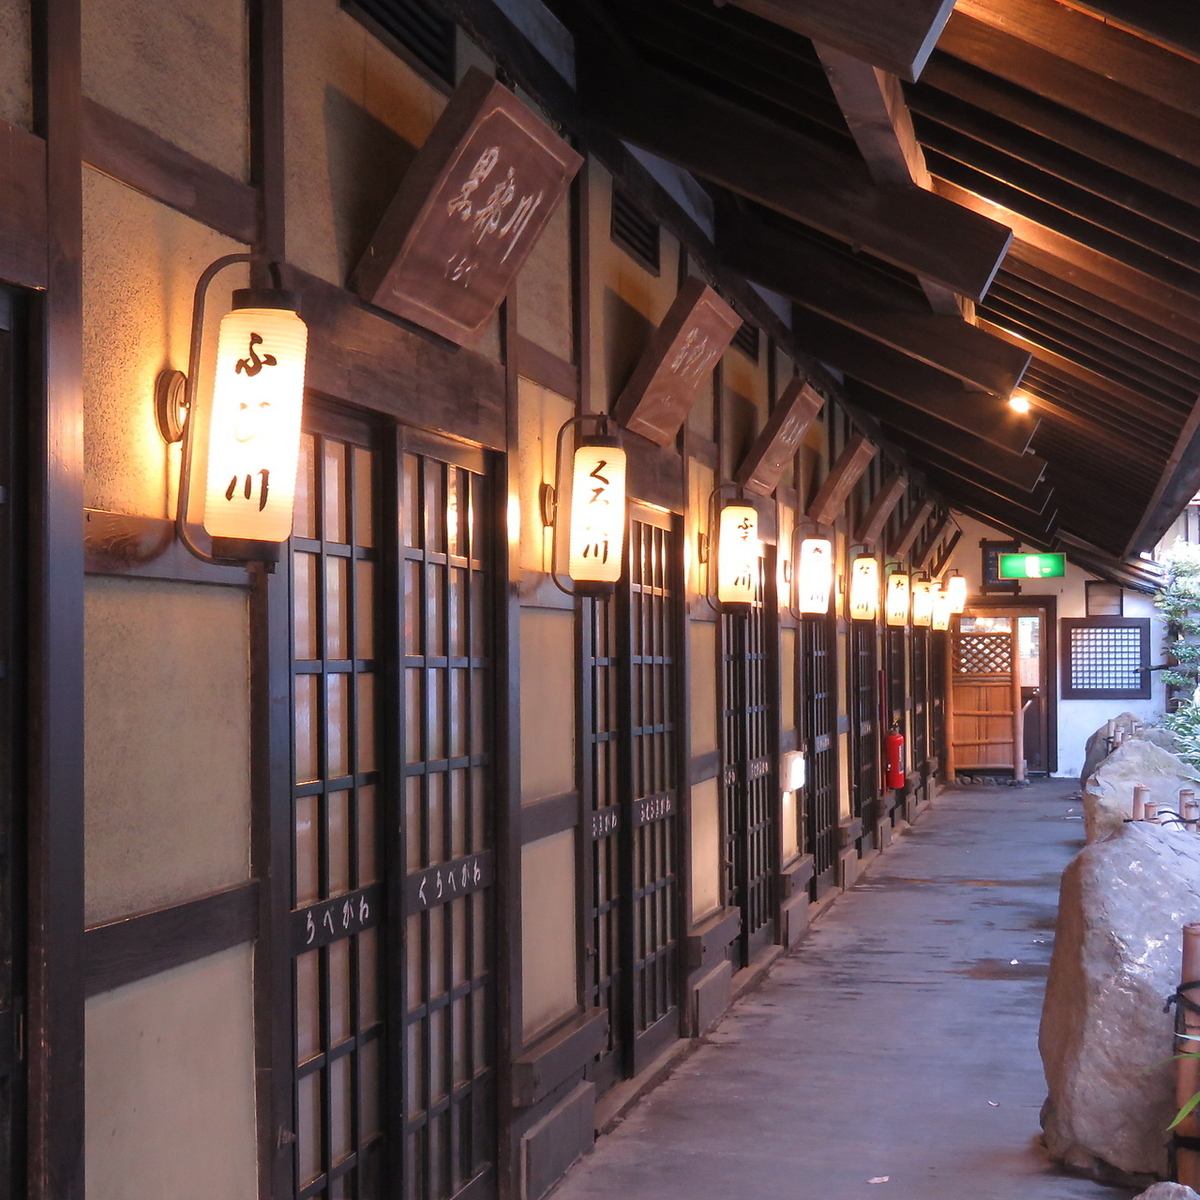 All rooms are private rooms with a lot of digging (Japanese-style seats).